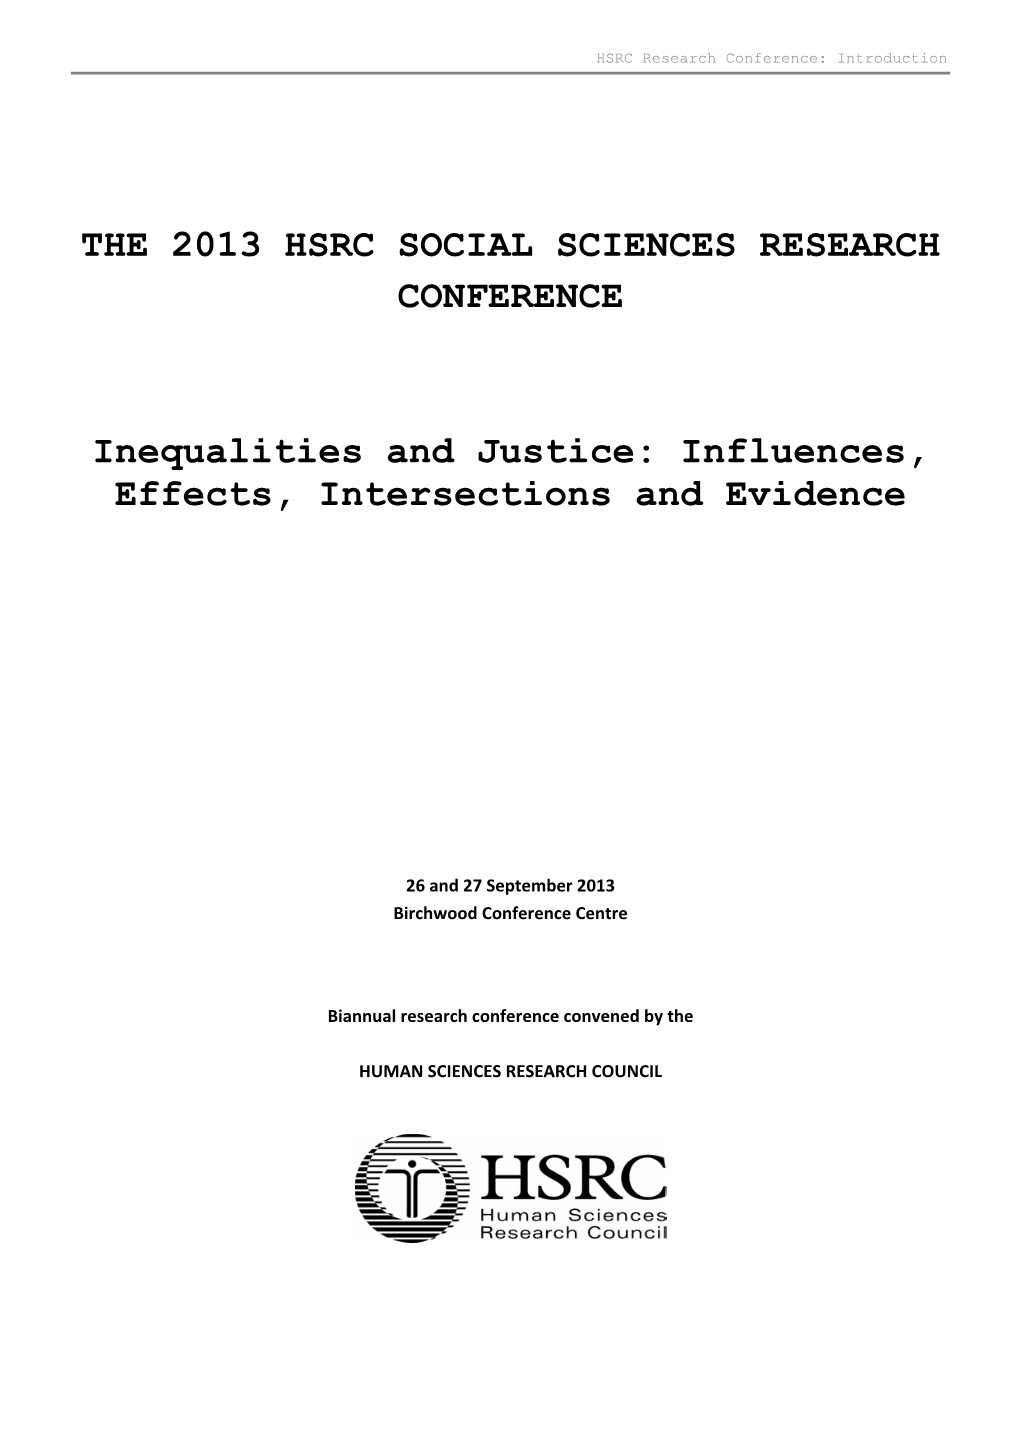 The 2013 Hsrc Social Sciences Research Conference